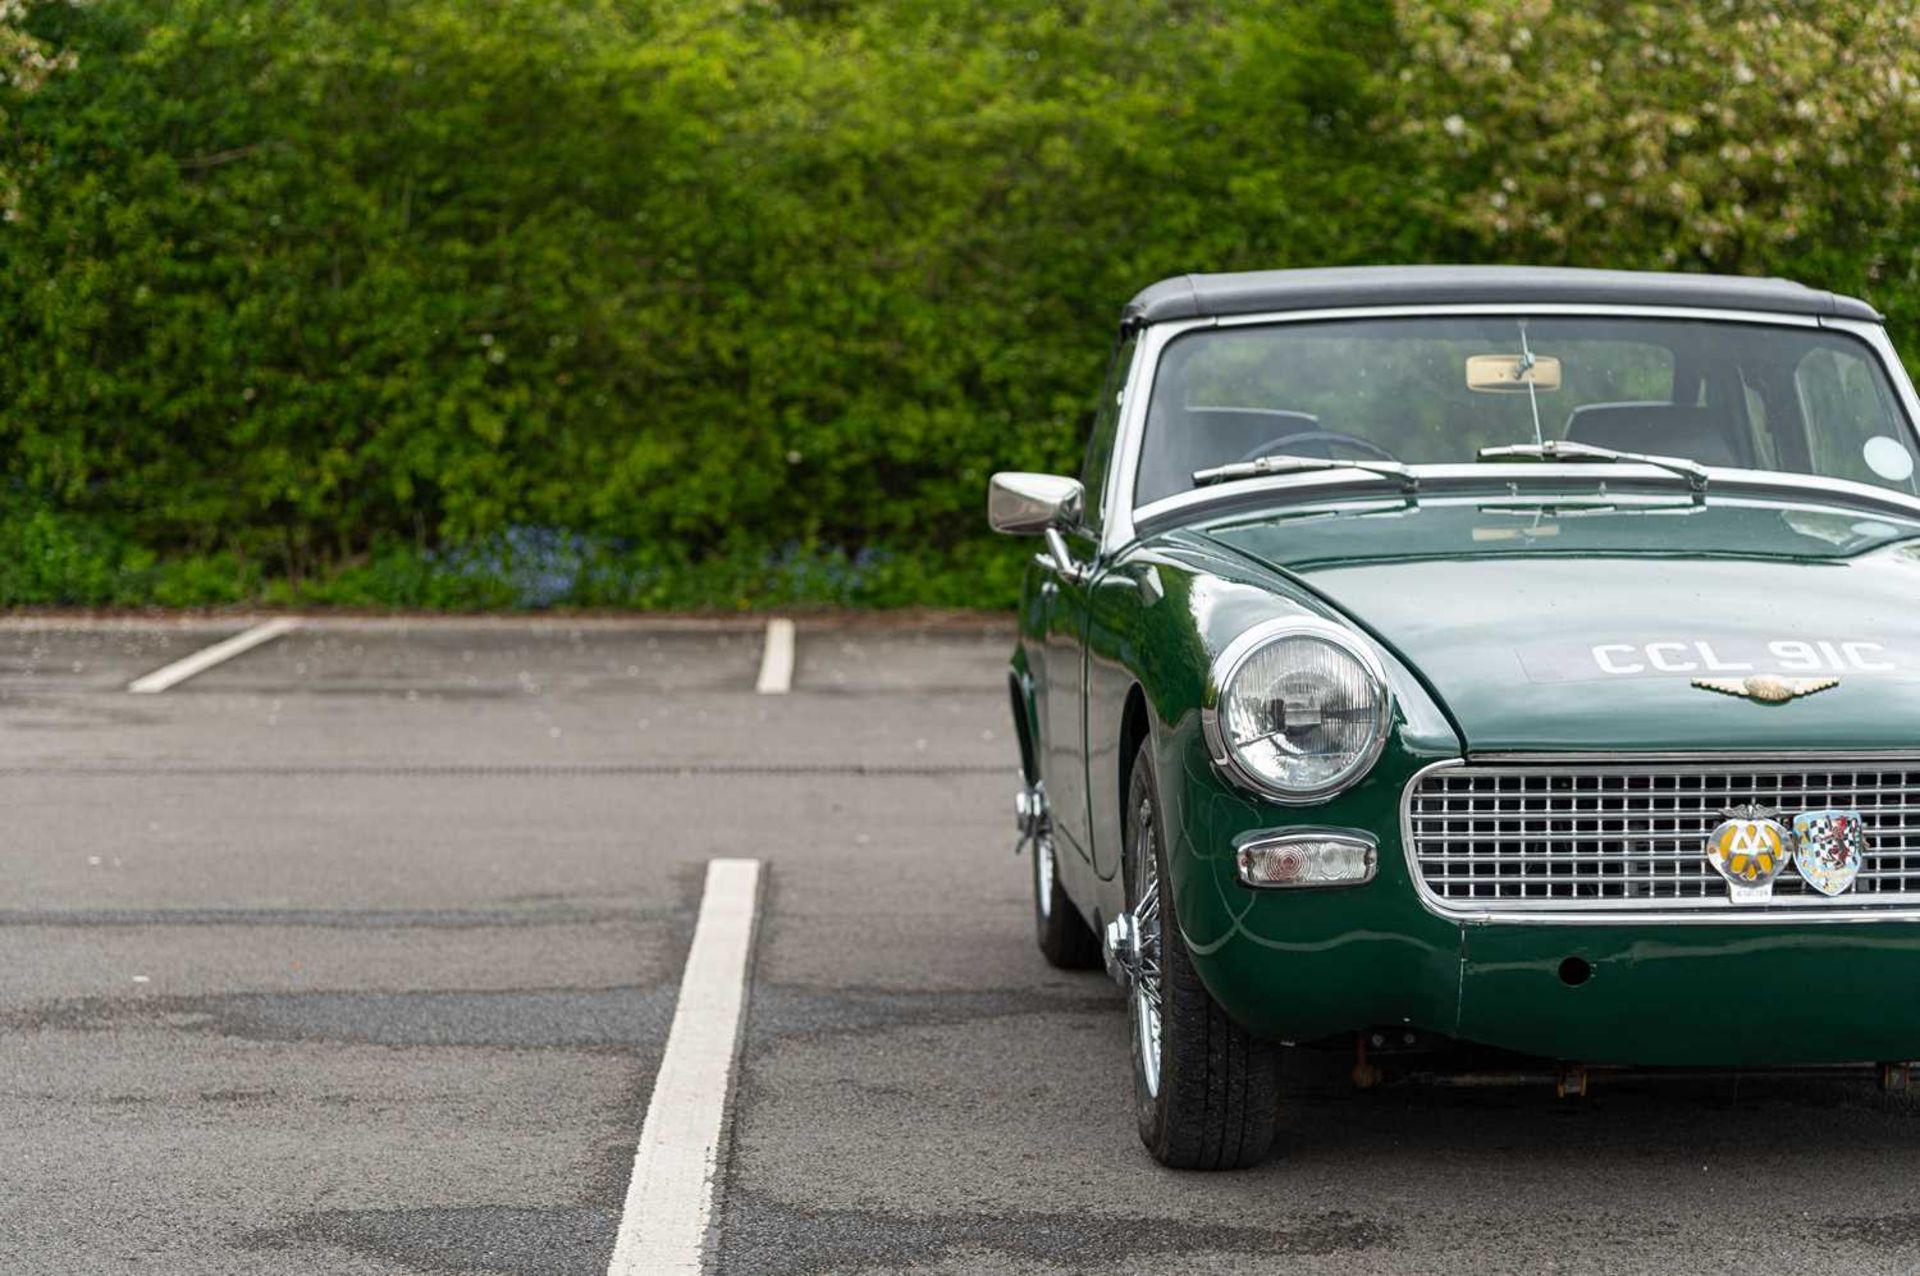 1965 Austin-Healey Sprite Formerly the property of British Formula One racing driver David Piper - Image 14 of 71